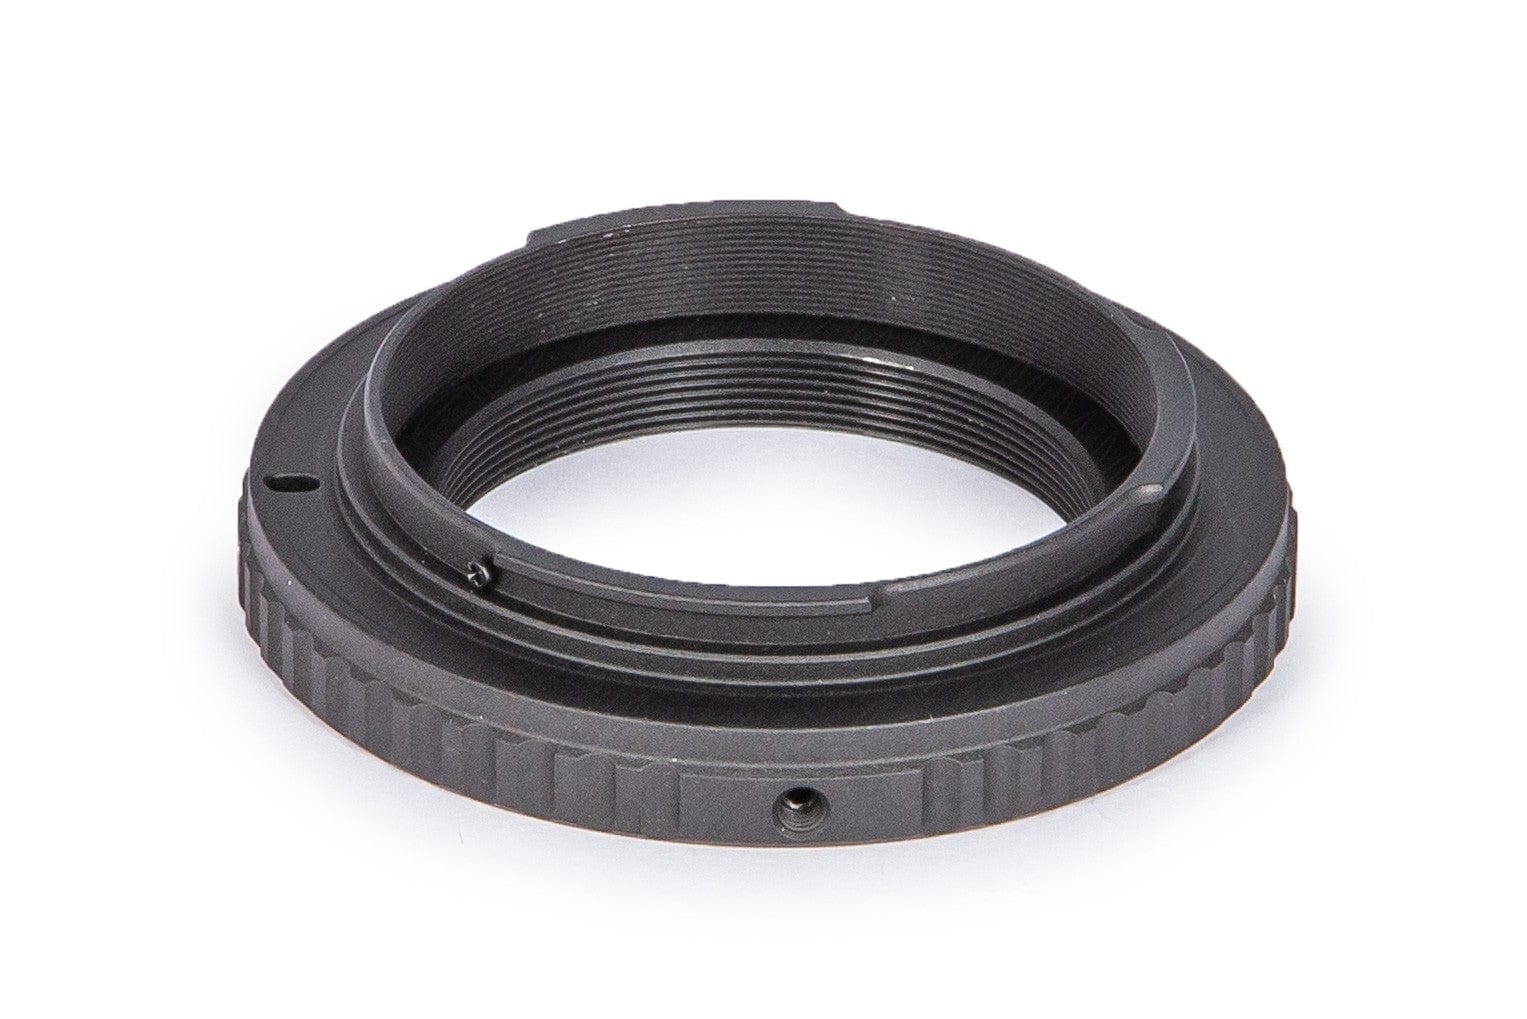 Baader Planetarium Accessory Baader Wide T-Ring Canon R (for Canon R bayonet) with D52i to T-2 and S52 - 2408336